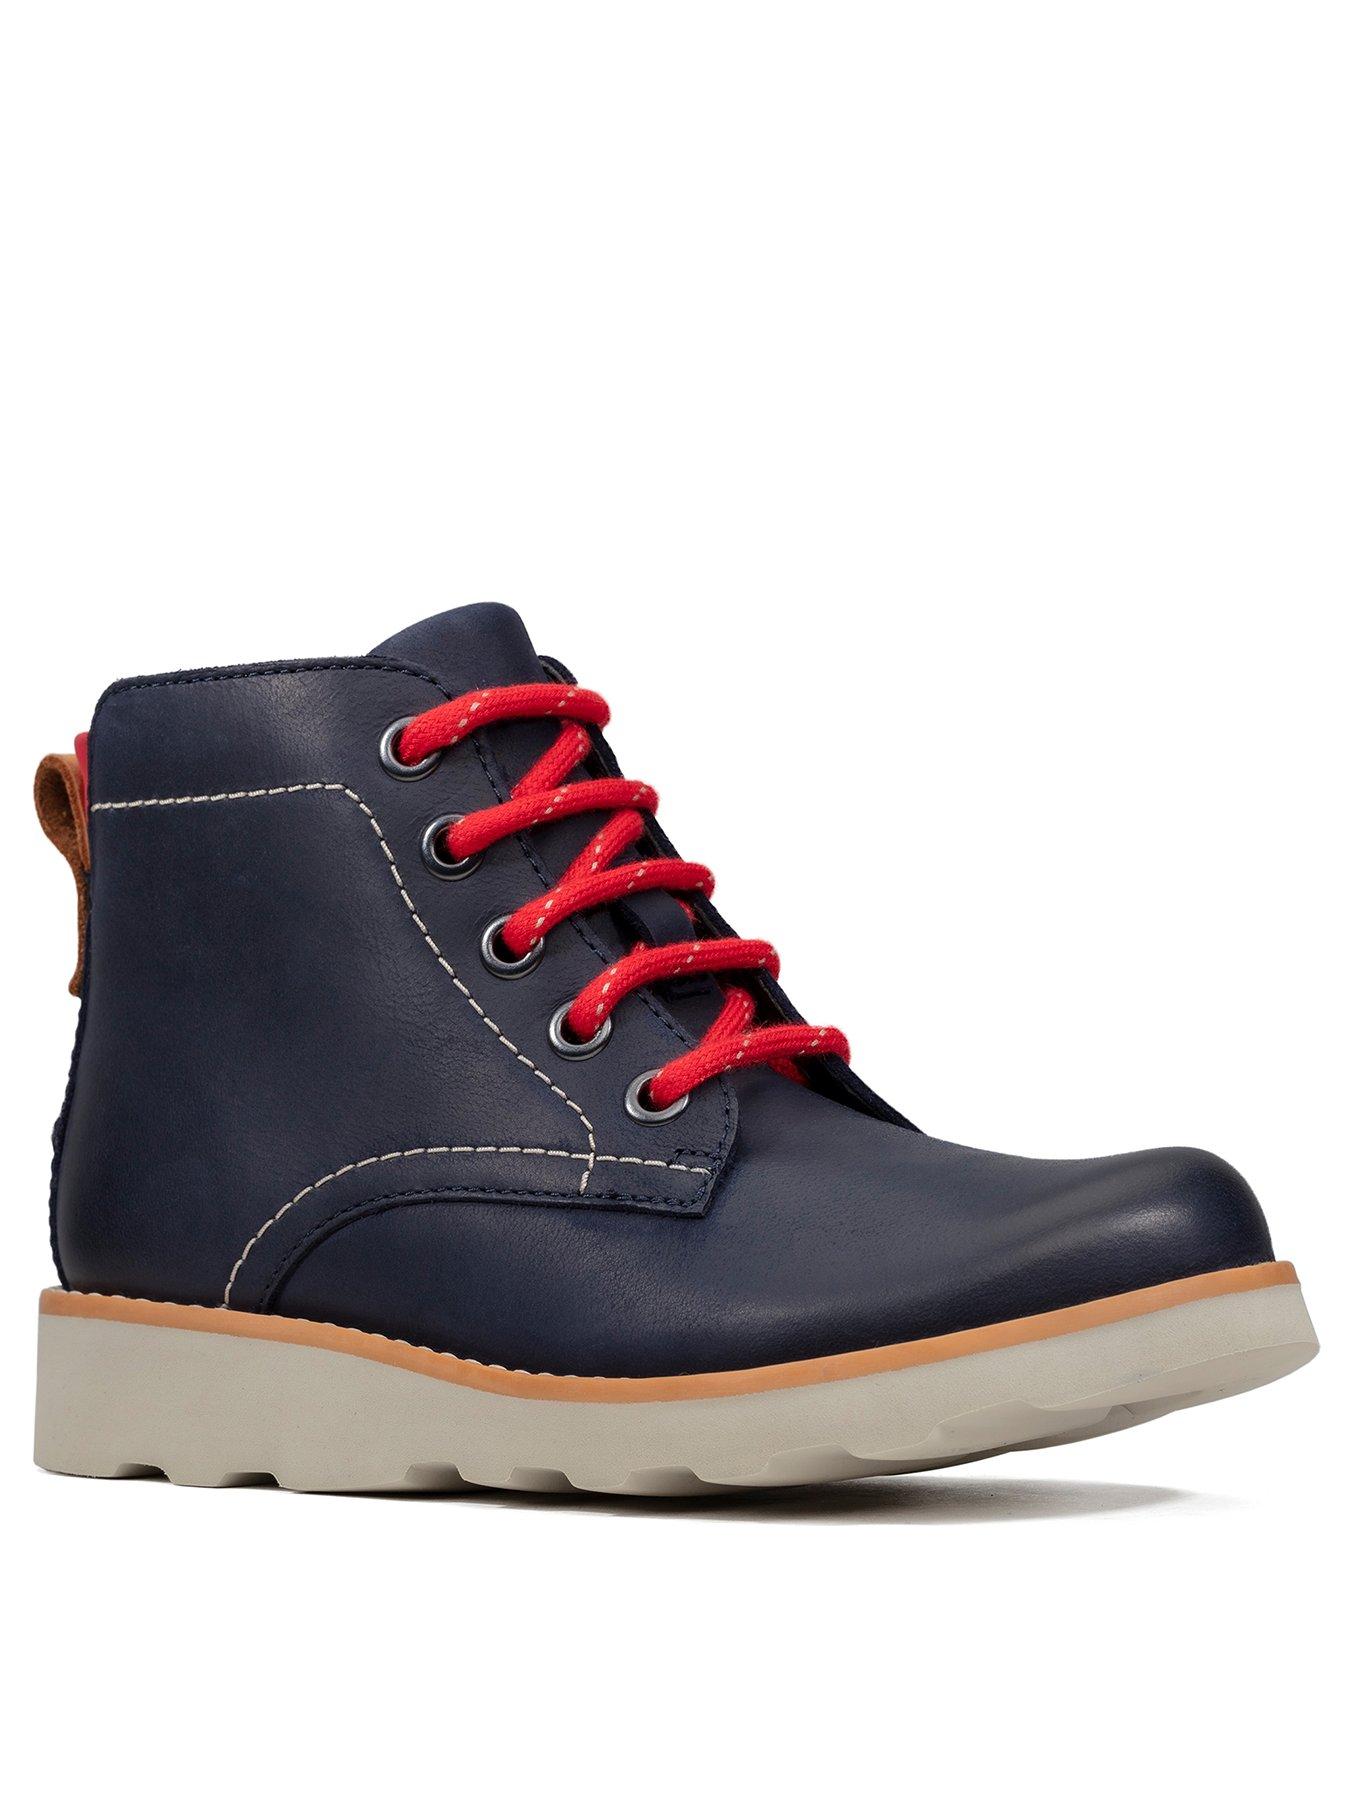 clarks clearance outlet online